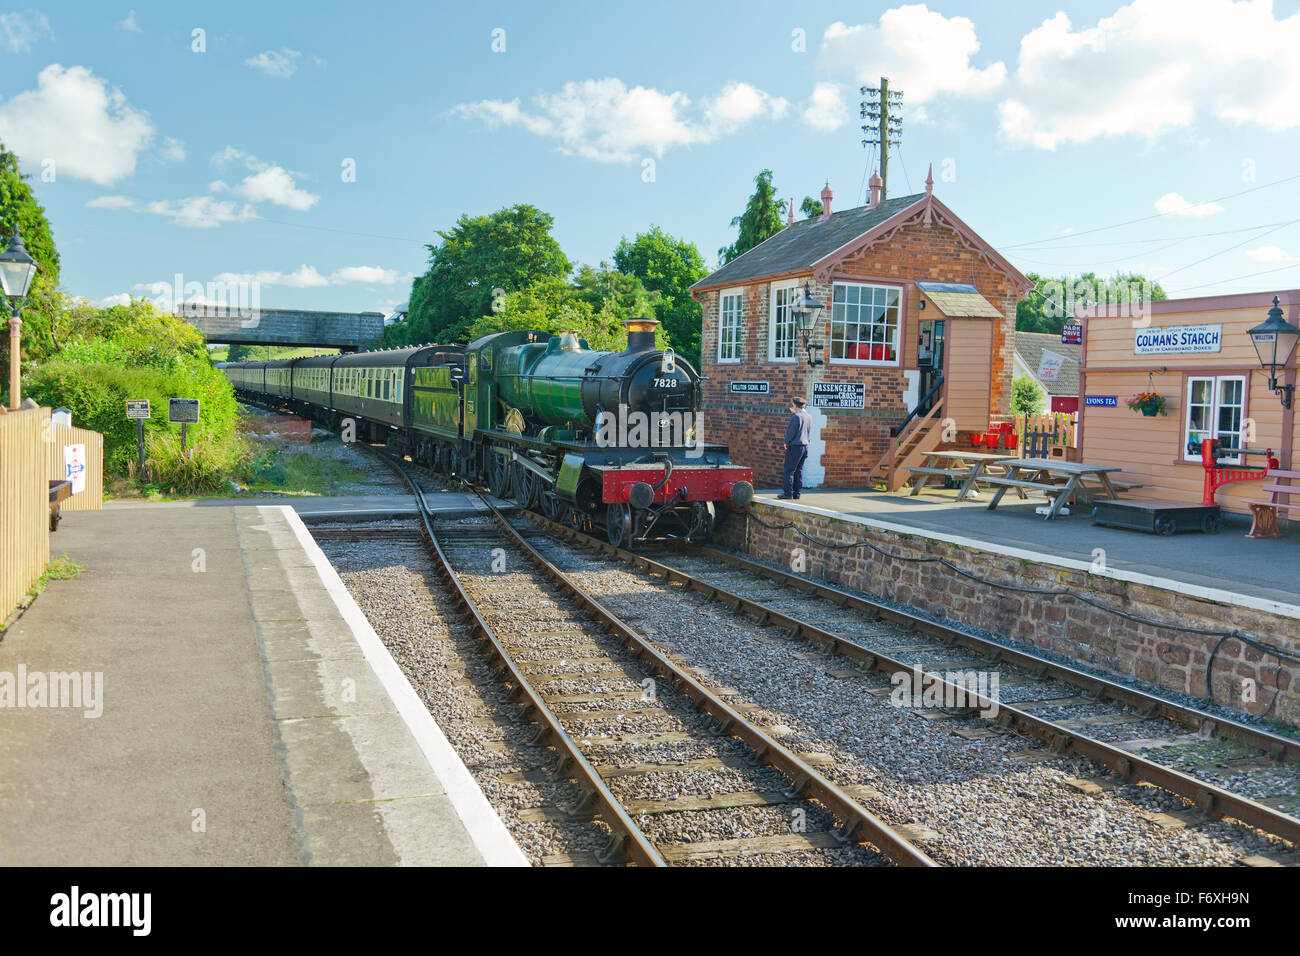 Ex GWR steam loco 7828 'Odney Manor' arriving at Williton with a train for Minehead on the West Somerset Railway, England, UK Stock Photo